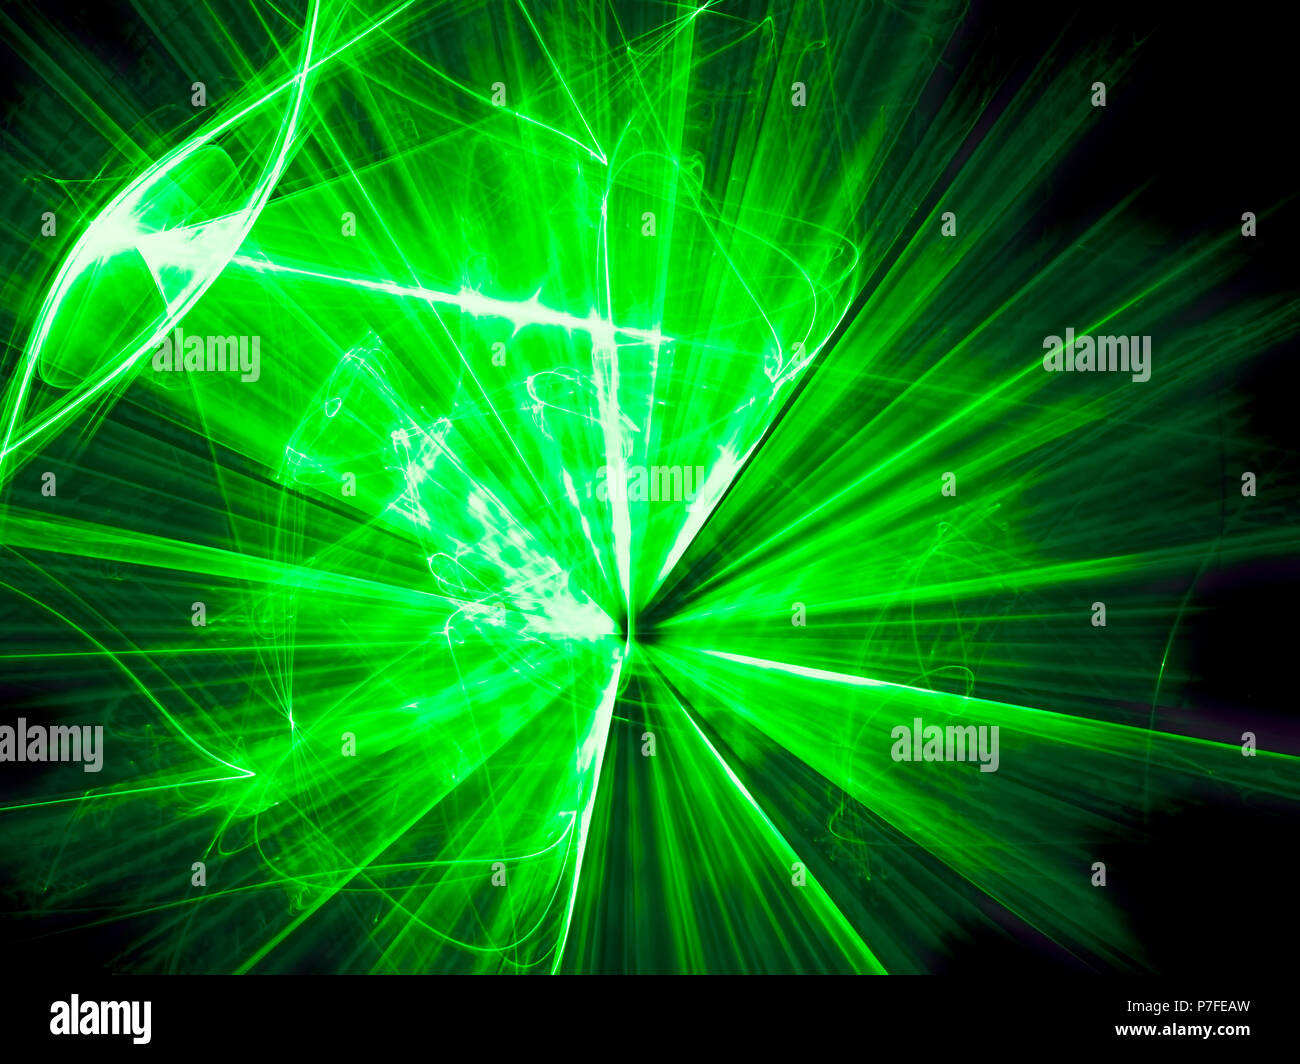 Abstract wavy background - digitally generated image Stock Photo